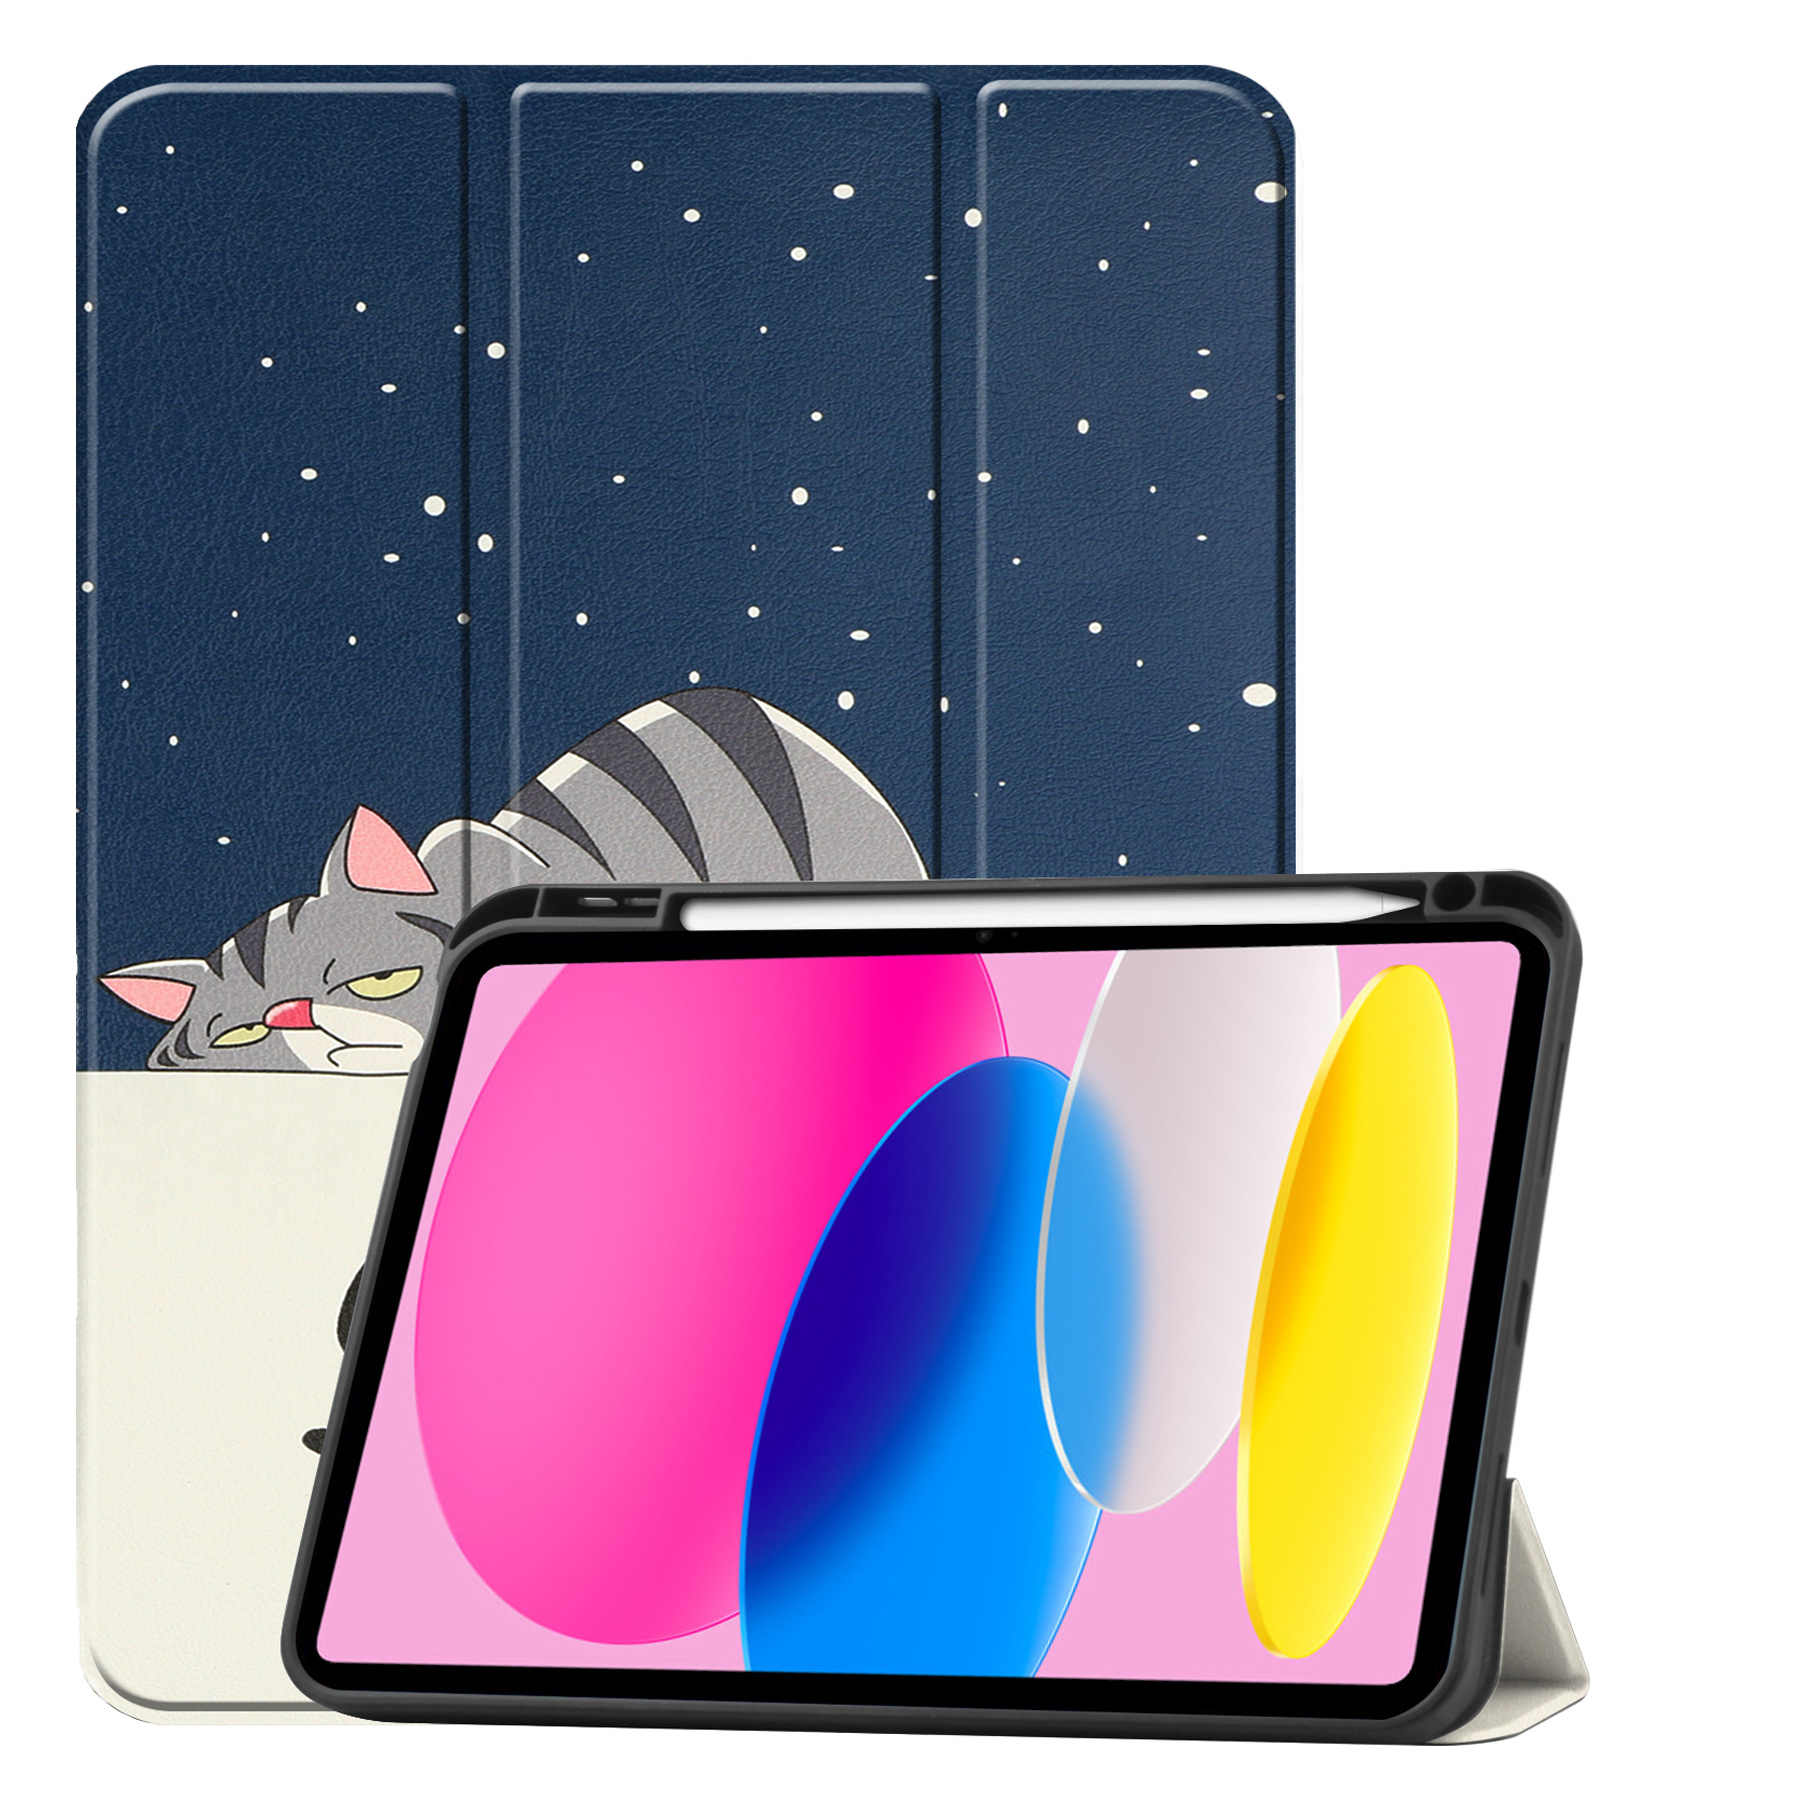 iPad 2022 Hoesje Book Case Hard Cover Hoes Met Uitsparing Apple Pencil - iPad 10 Hoes Hardcover - Licht Blauw